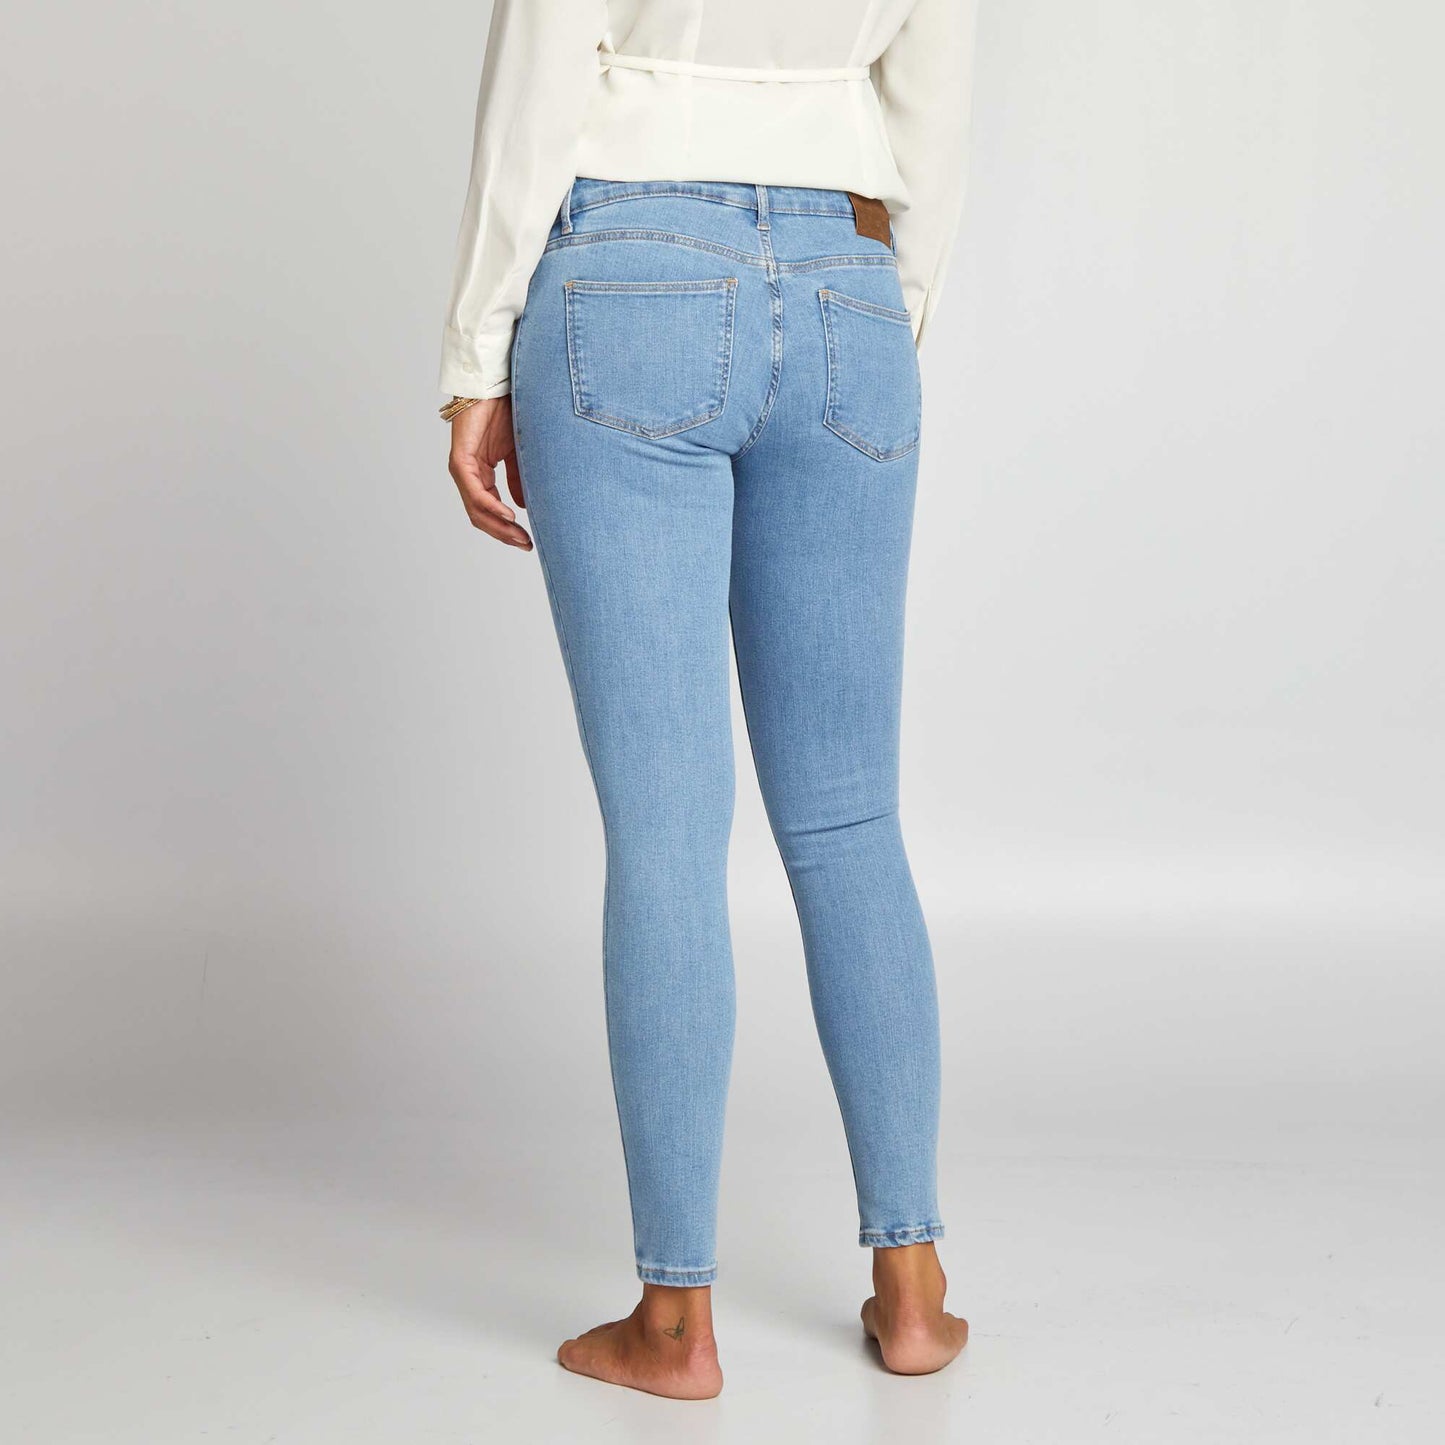 Super stretchy maternity jeans Blue